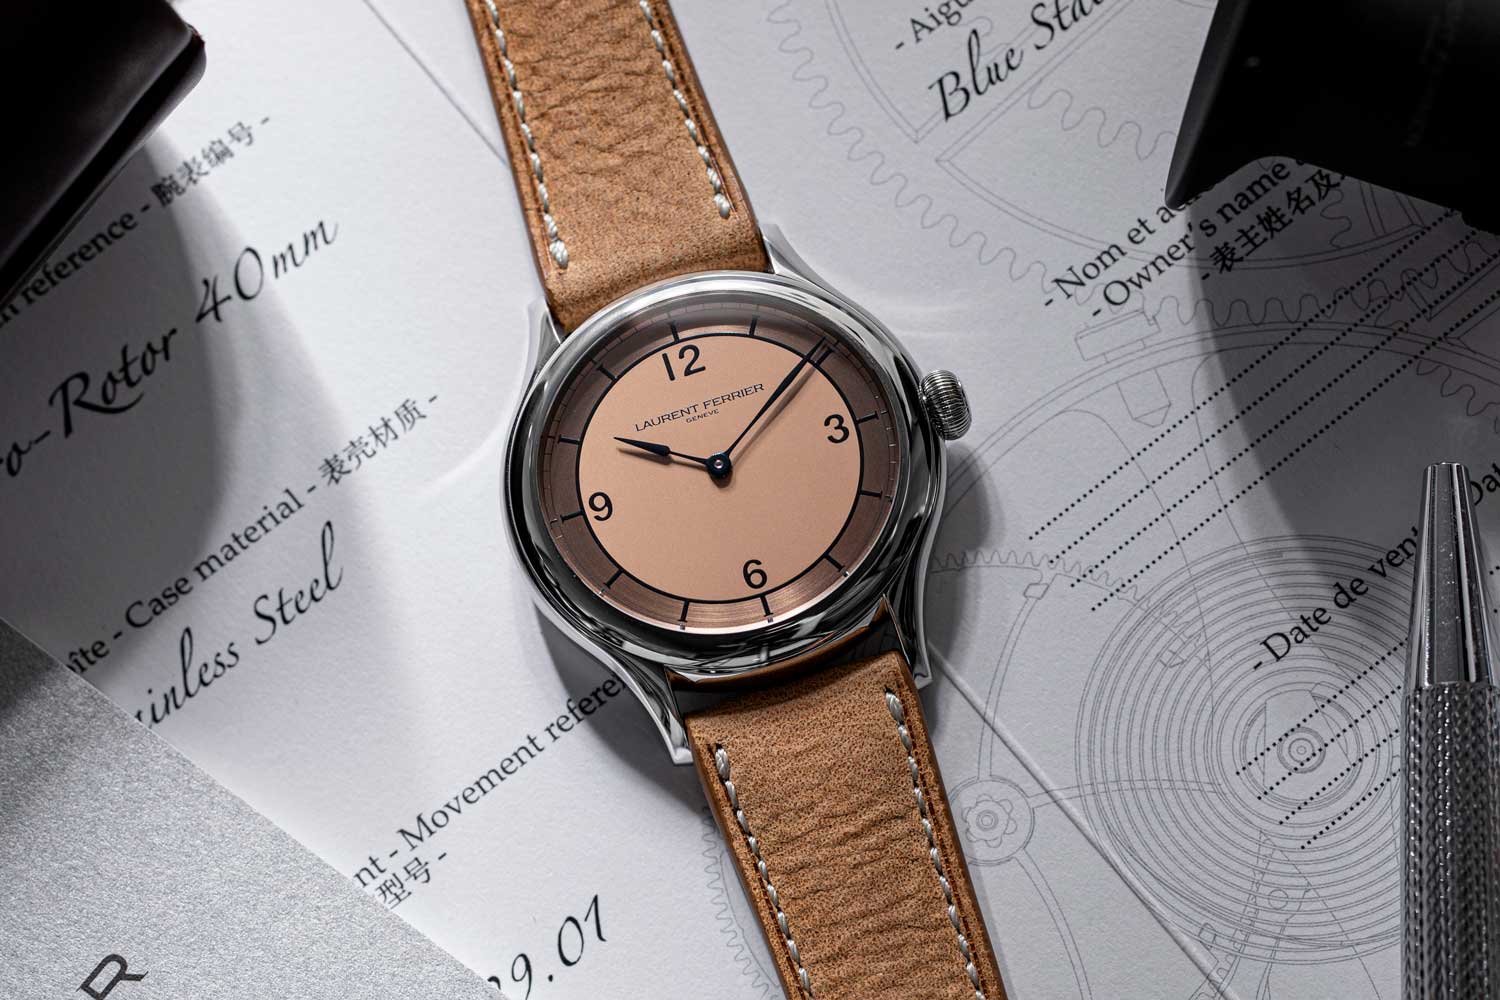 The Laurent Ferrier Steel Galet Micro-Rotor Salmon Dial pièce unique for Revolution, features an Automn (salmon, in Laurent Ferrier speak and is powered by the self-winding FBN 229.01 micro-rotor movement which has a double direct impulse on the balance, an exclusive double direct-impulse escapement in silicon directly incorporated into the balance (©Revolution)